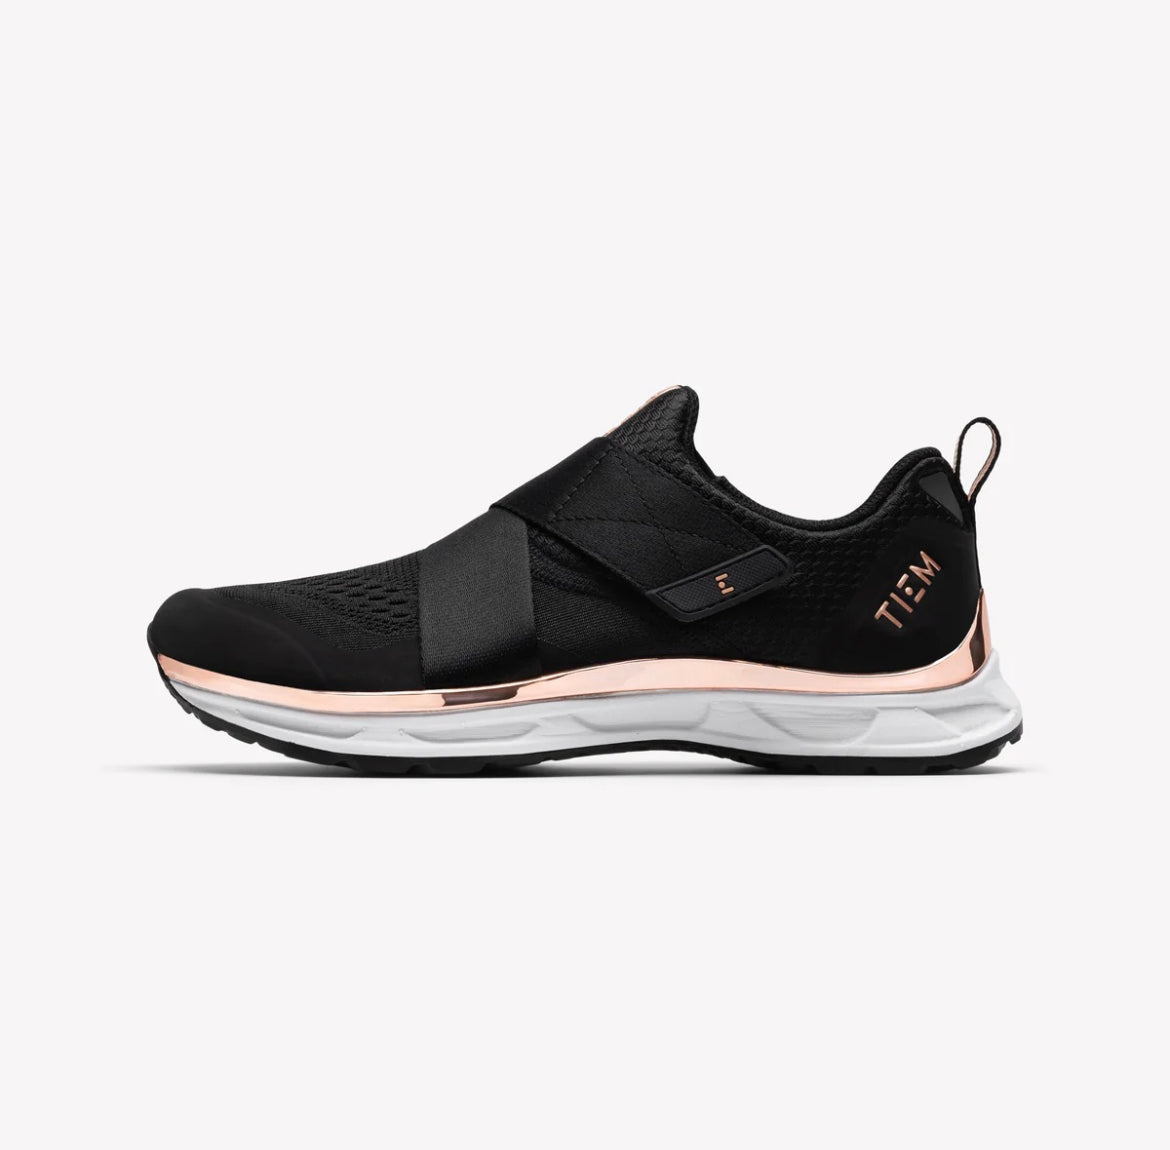 TIEM Slipstream Cycling Shoes with SPD Clips - Rose Gold